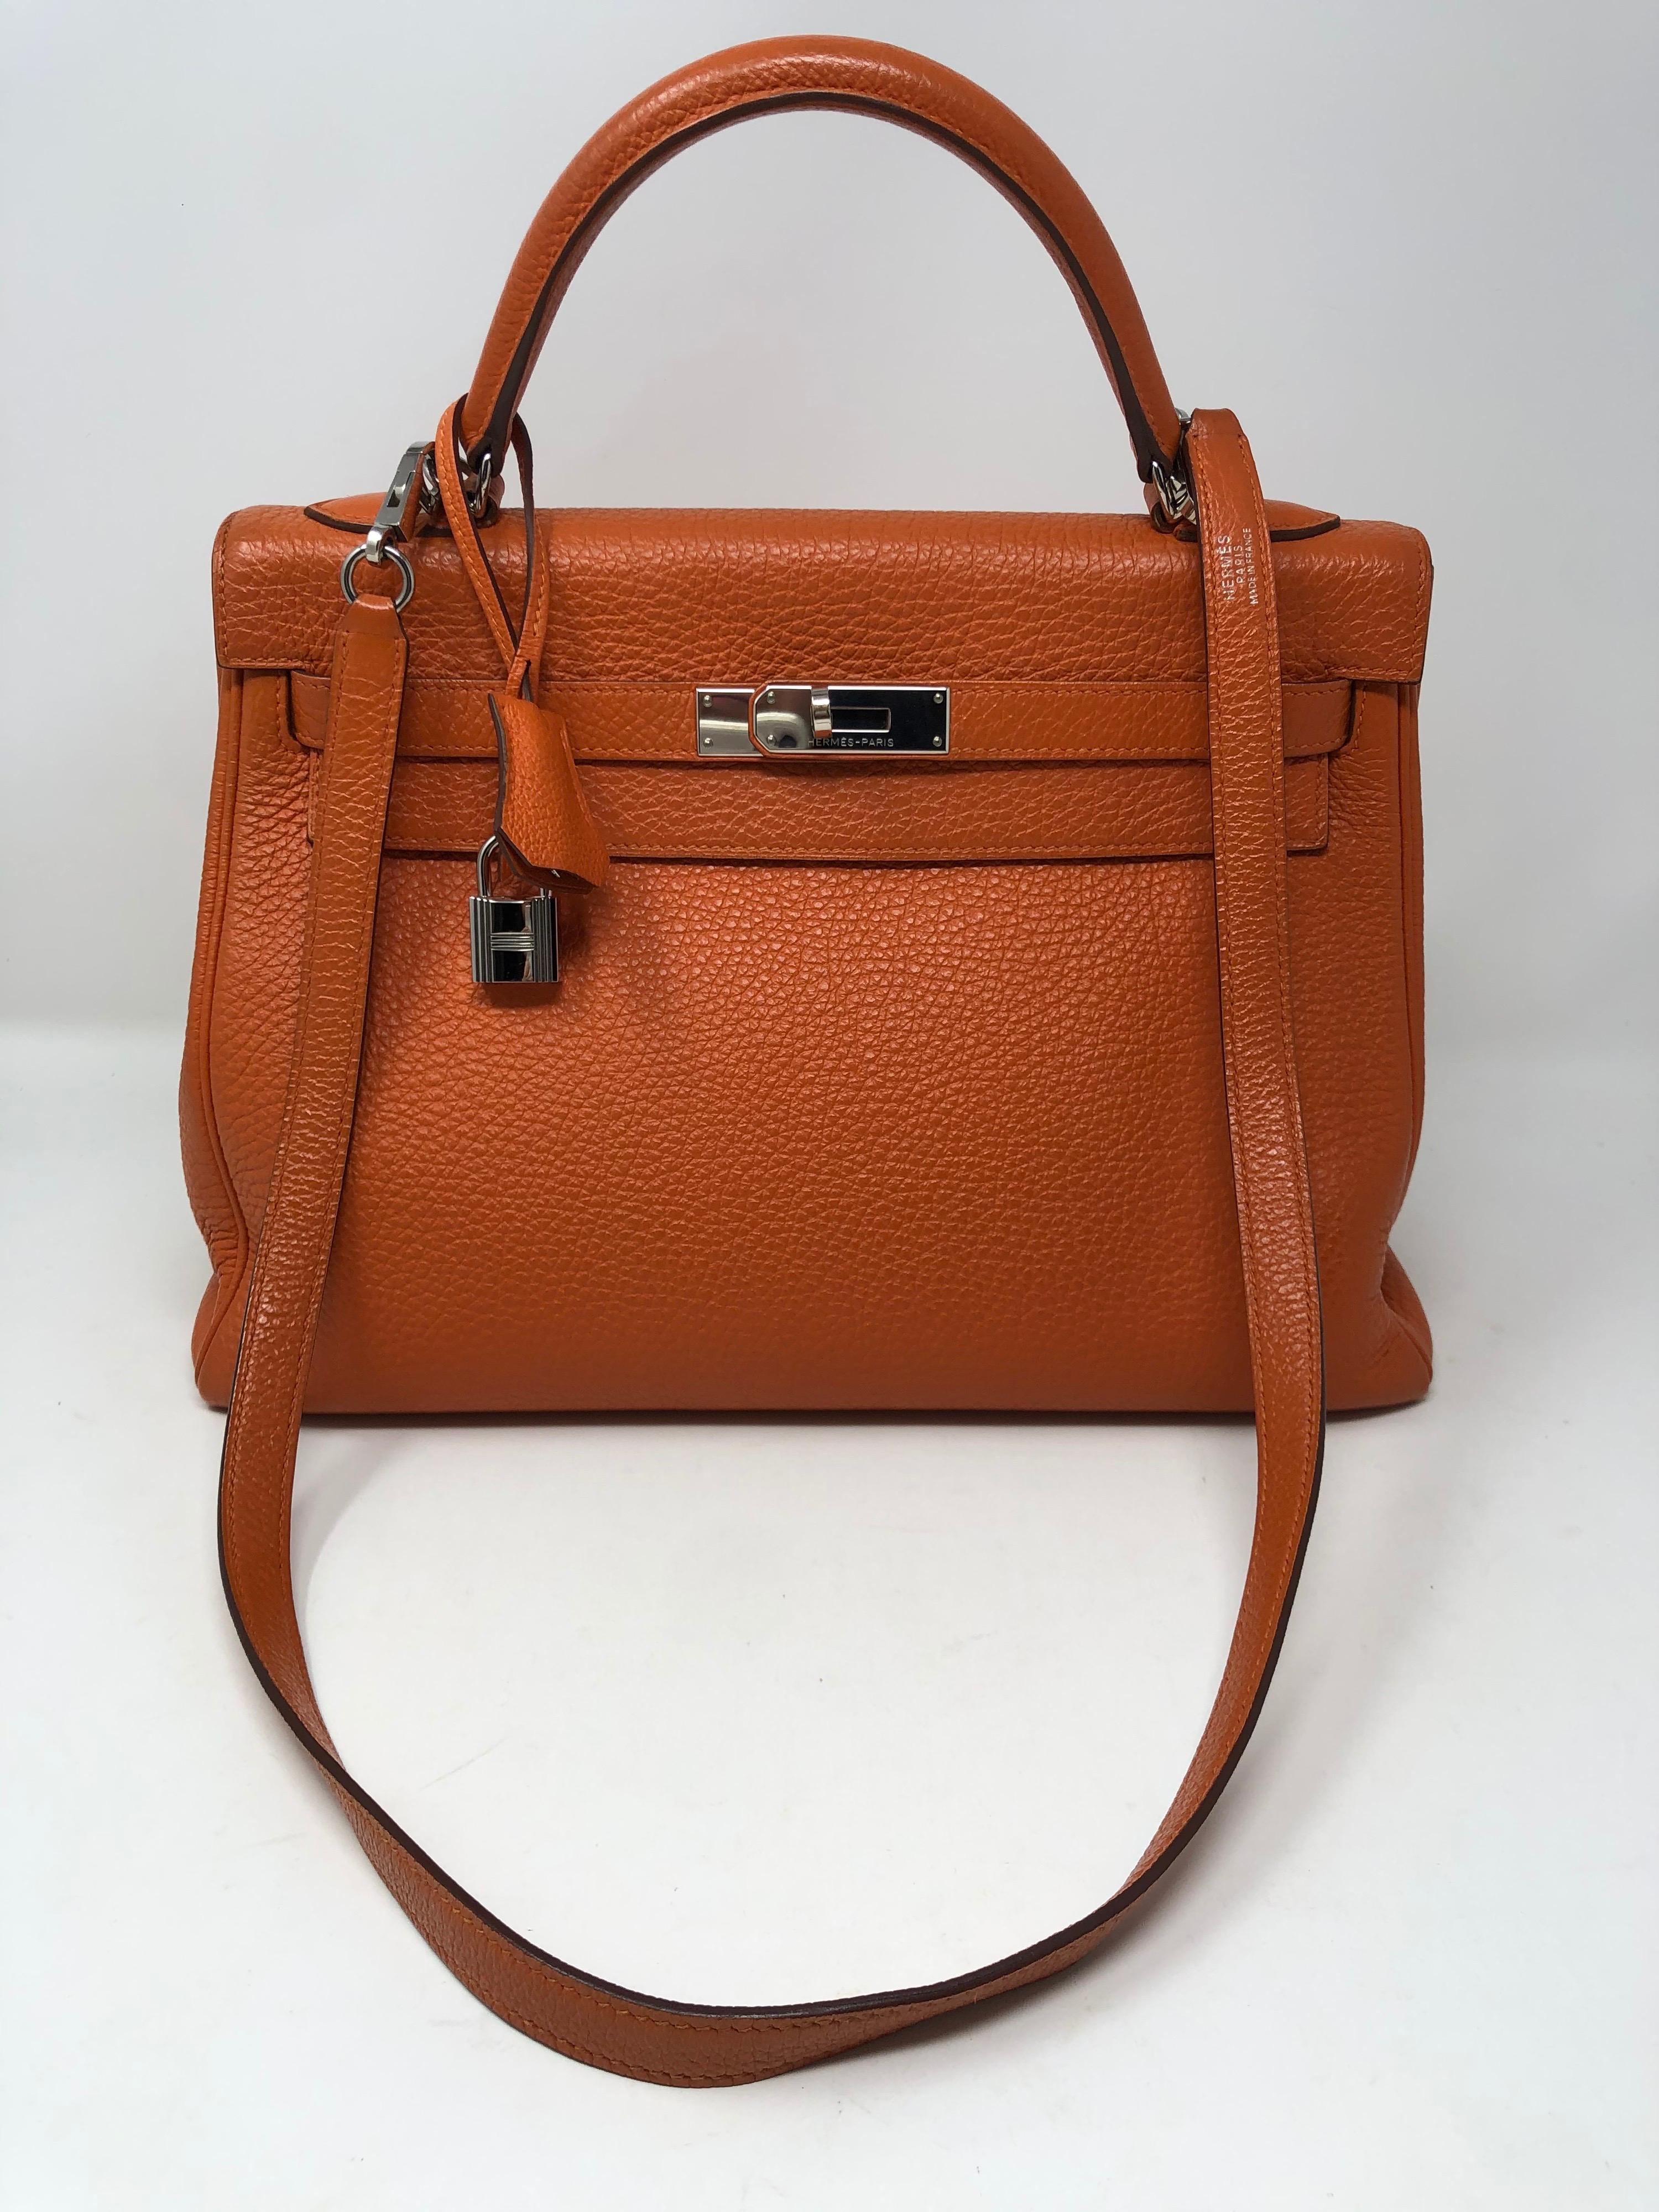 Hermes Kelly 32 Orange Bag. Palladium hardware. Excellent condition. Most wanted size 32 Kelly. Full set. Includes clochette. lock, keys, dust cover and box. Guaranteed authentic. 